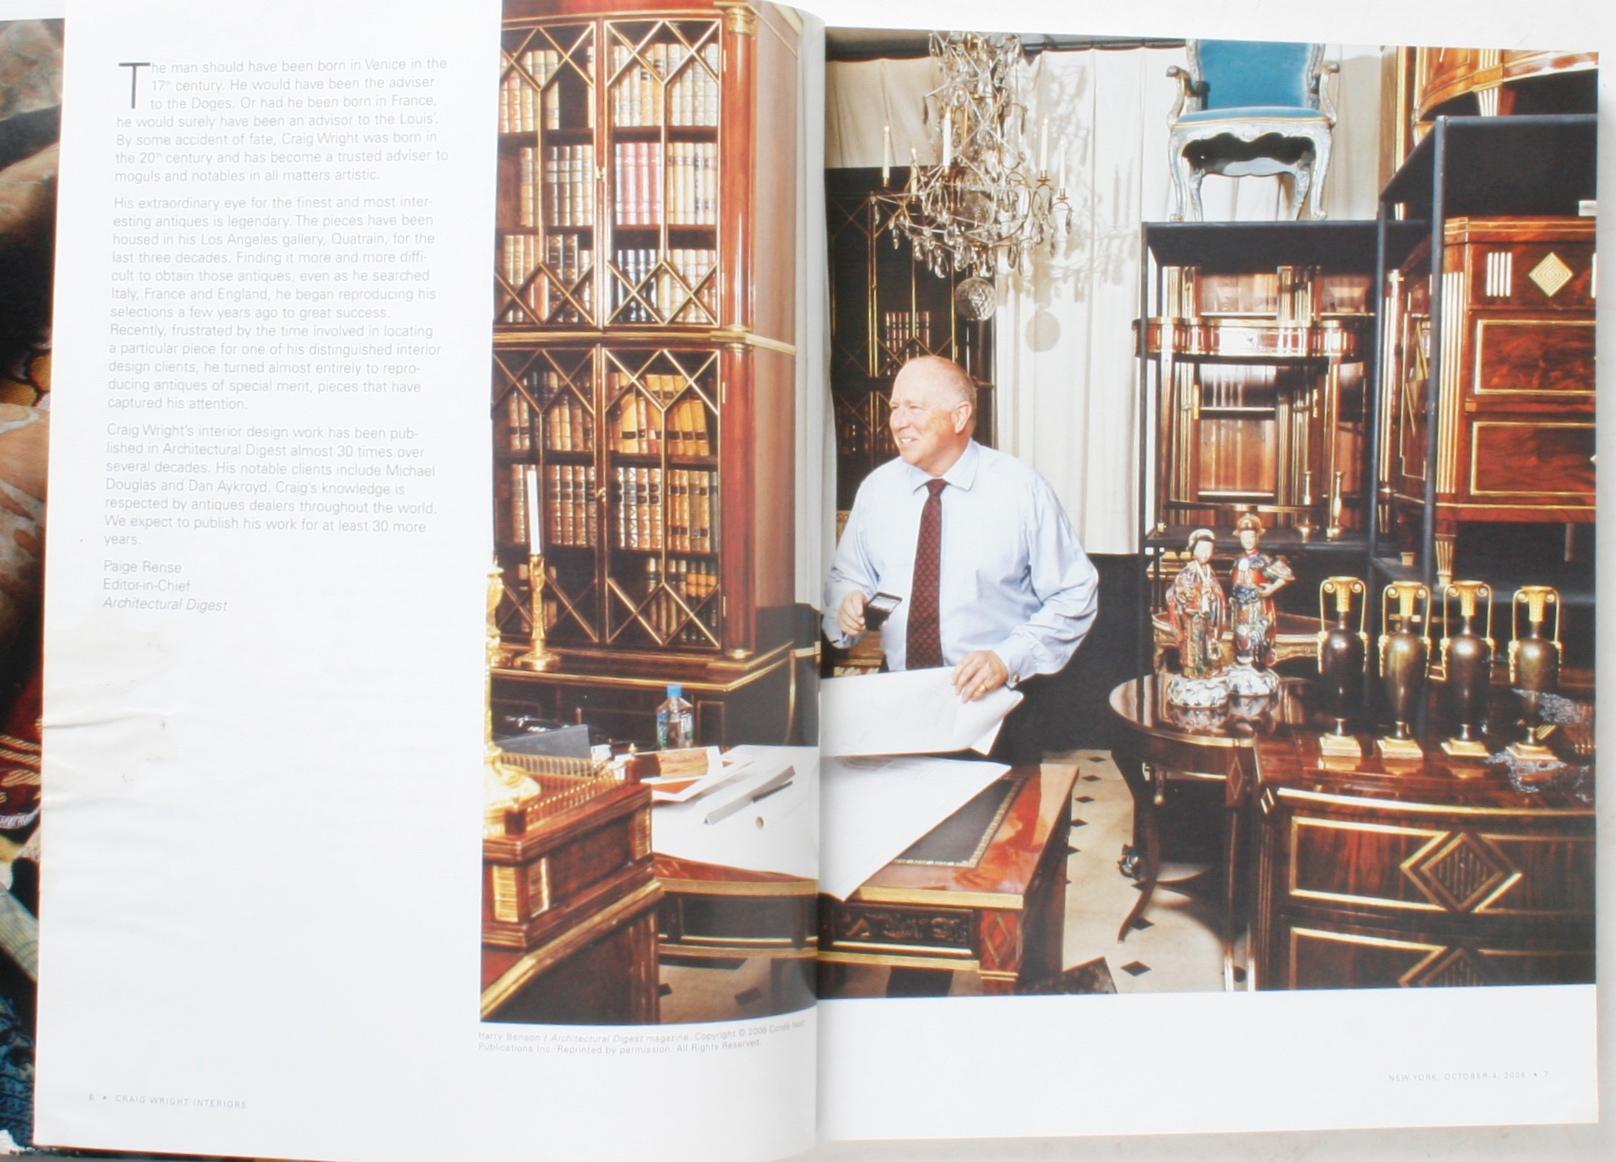 Sotheby's: Craig Wright Interiors, New York: October 4, 2006. Softcover auction catalogue with results. 212 pages of: Russian, Italian, French and English 18th and early 19th century furniture. Many of the pieces come from Wright’s own personal